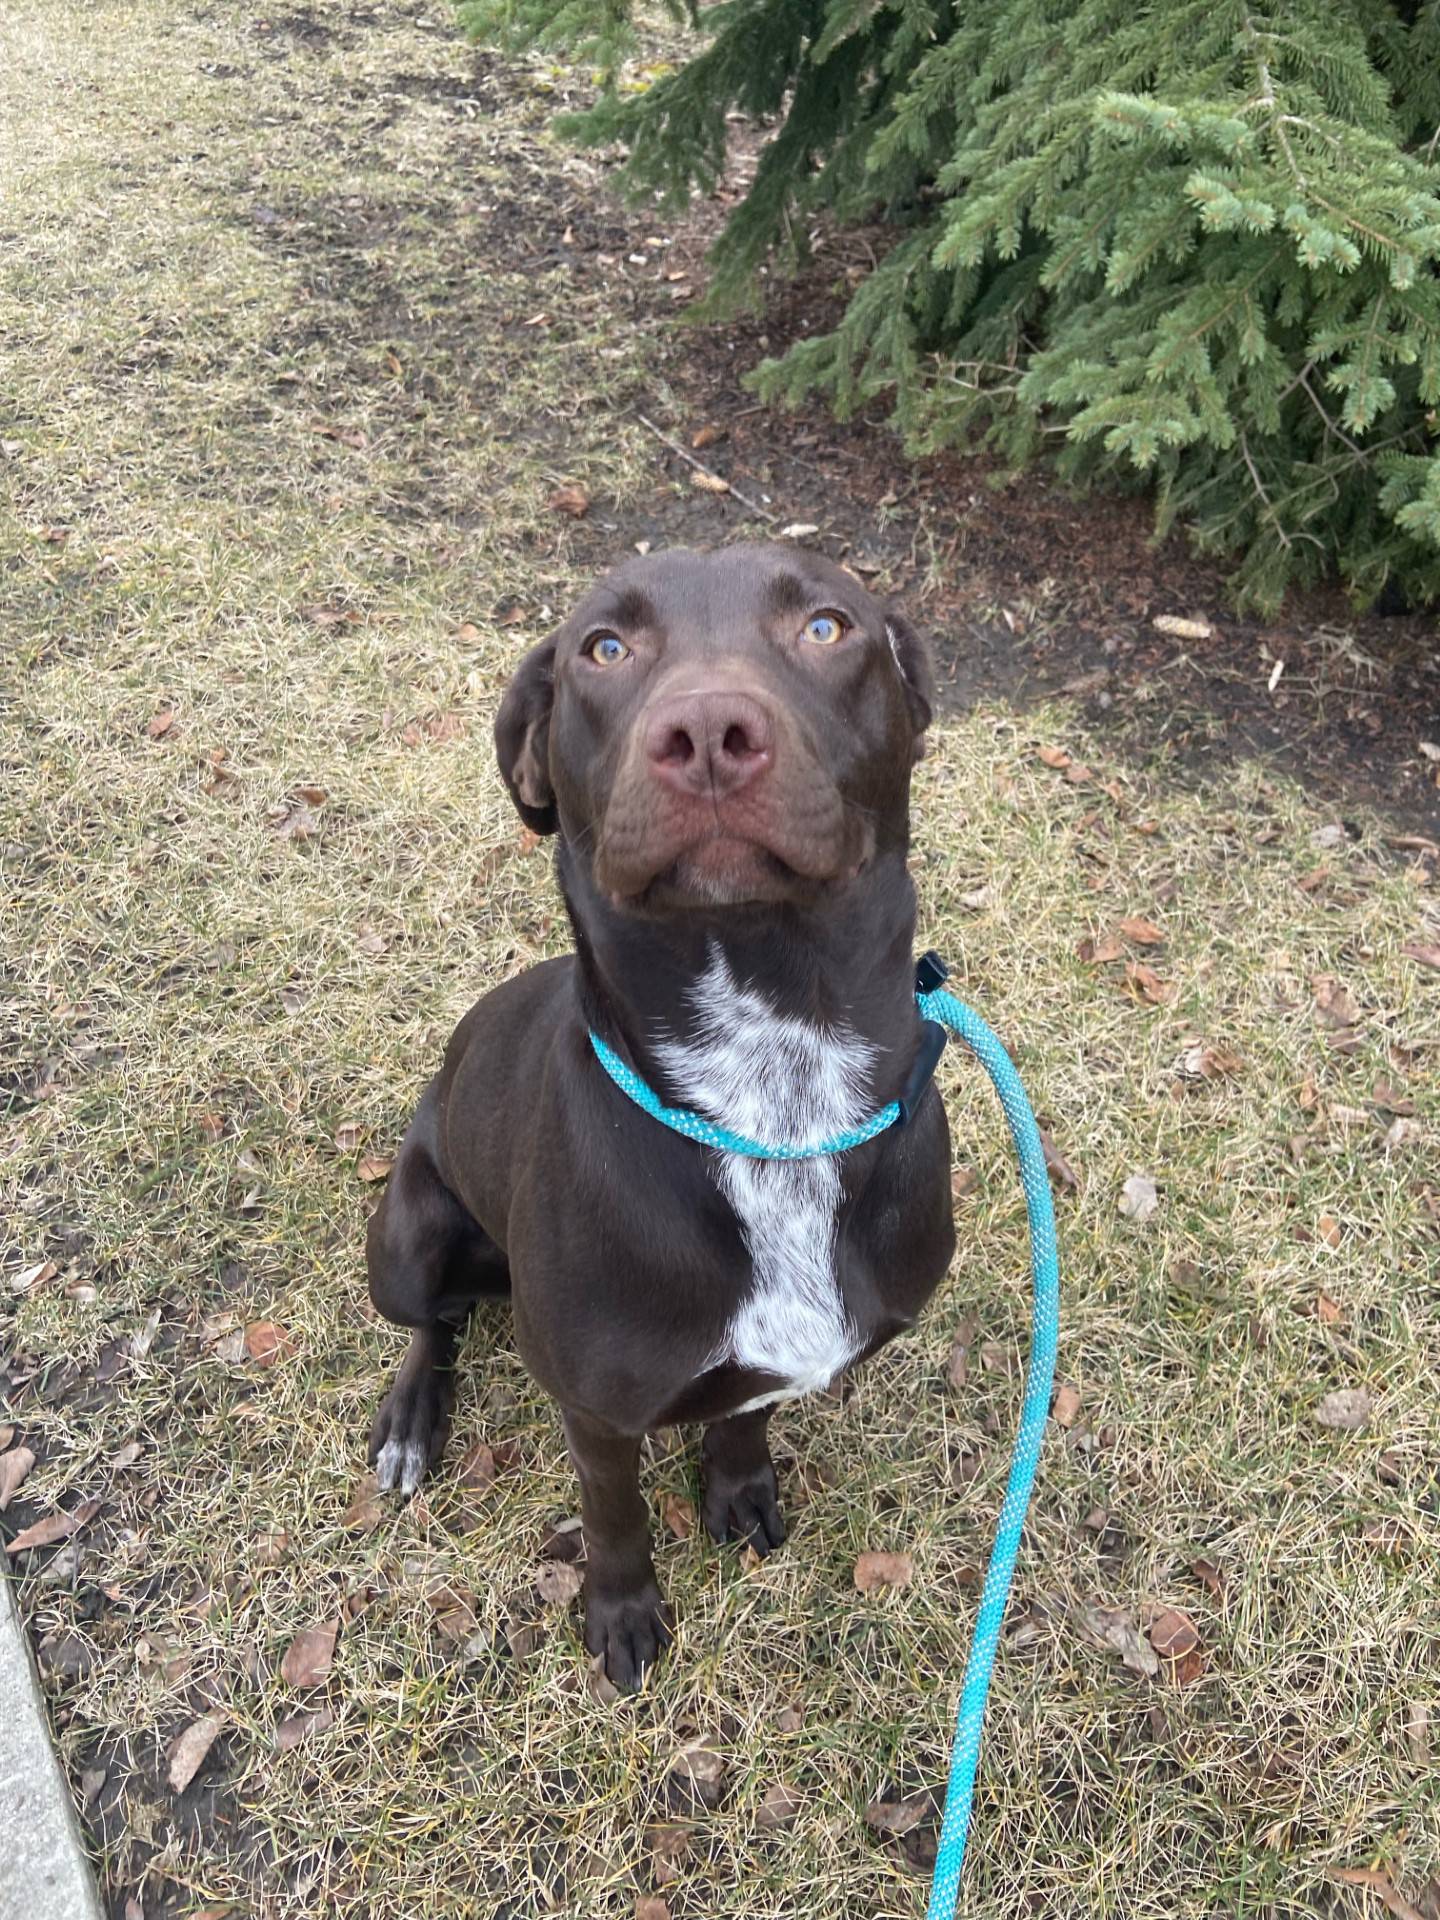 Kiwi is a 10-month-old chocolate lab puppy. She is energetic, super sweet and friendly. She loves everyone she meets and would do well in a home with other dogs or children. To meet Kiwi, email Dogadoption@nawsus.org. Visit nawsus.org.